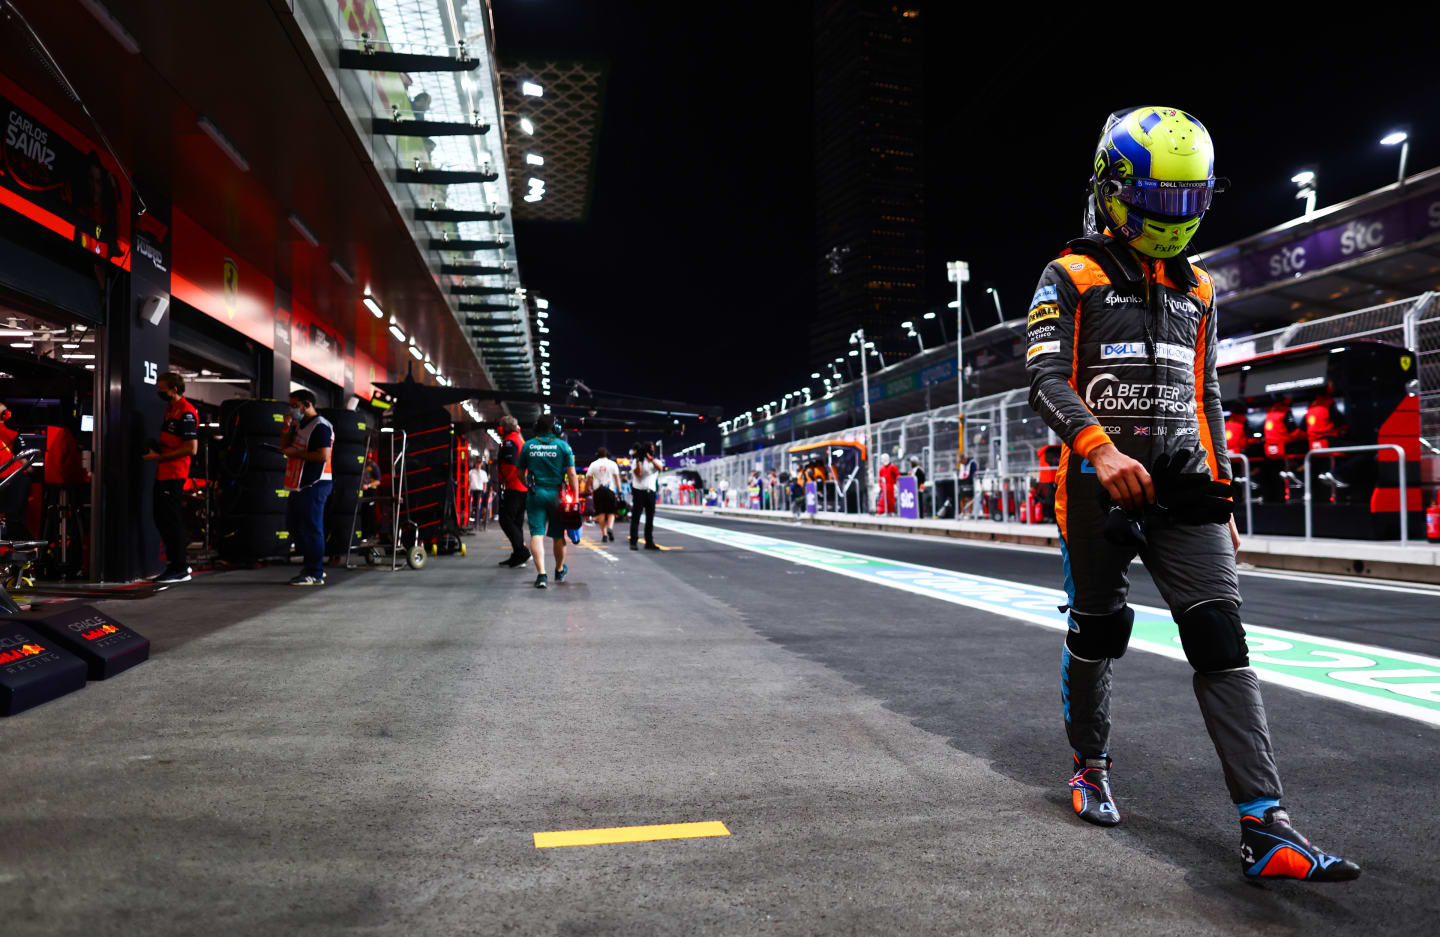 JEDDAH, SAUDI ARABIA - MARCH 26: Lando Norris of Great Britain and McLaren walks in the Pitlane after qualifying in 11th position during qualifying ahead of the F1 Grand Prix of Saudi Arabia at the Jeddah Corniche Circuit on March 26, 2022 in Jeddah, Saudi Arabia. (Photo by Mark Thompson/Getty Images)